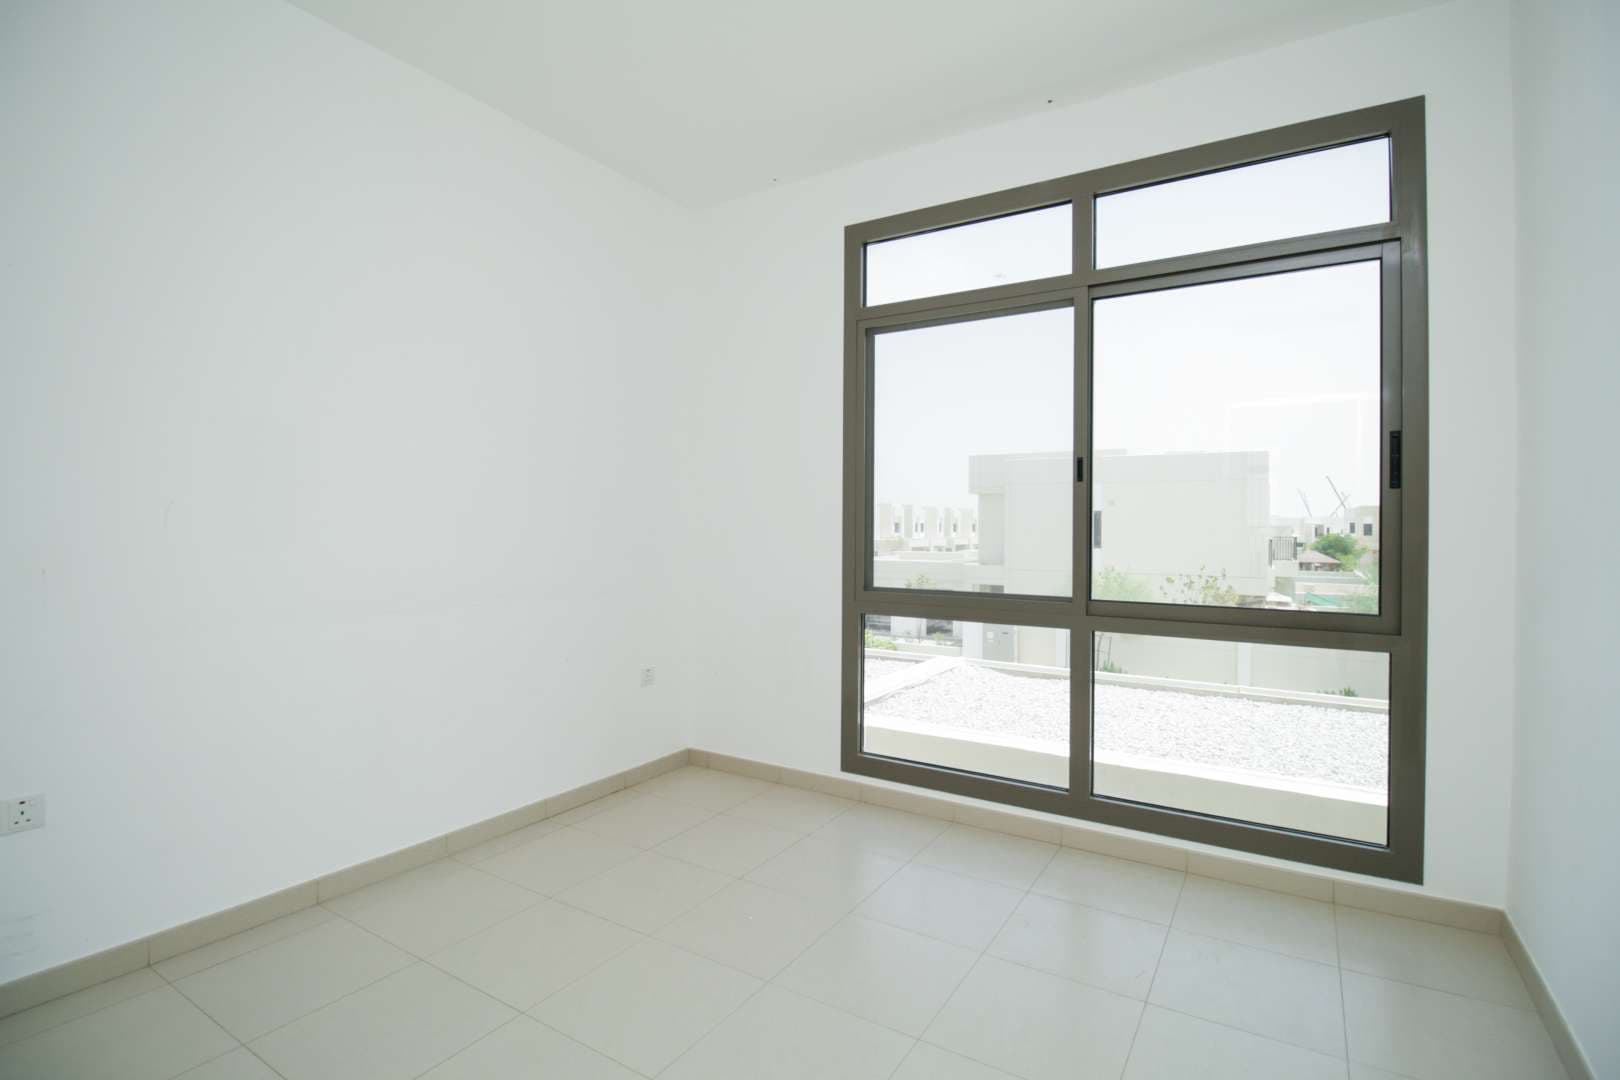 3 Bedroom Townhouse For Sale Safi Townhouses Lp07974 18b2bc7c8768000.jpg